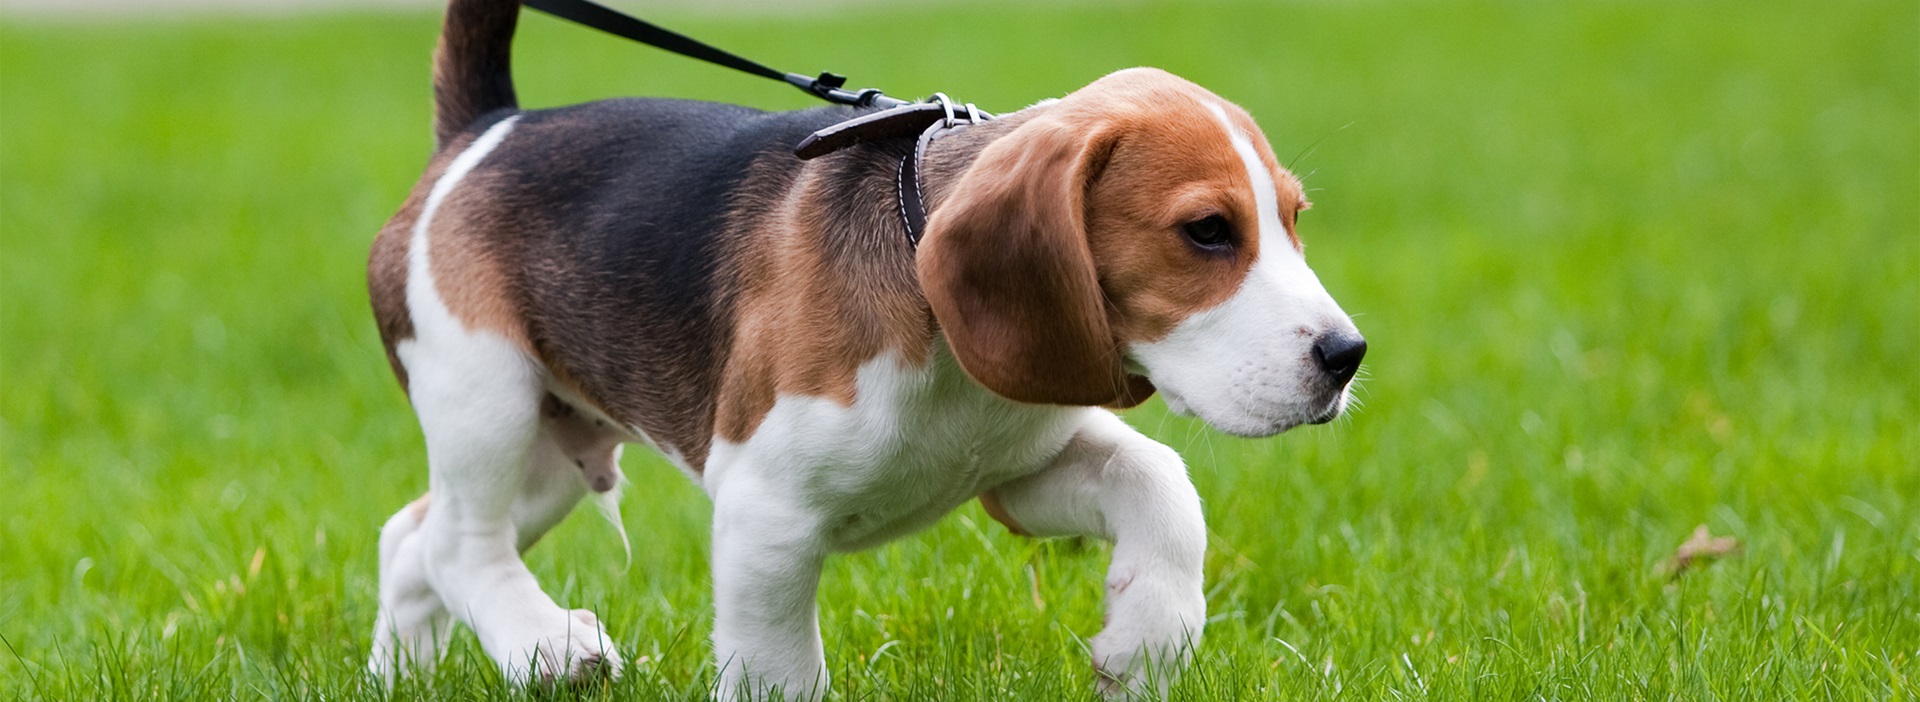 Photo of a dog holding its leash in its mouth